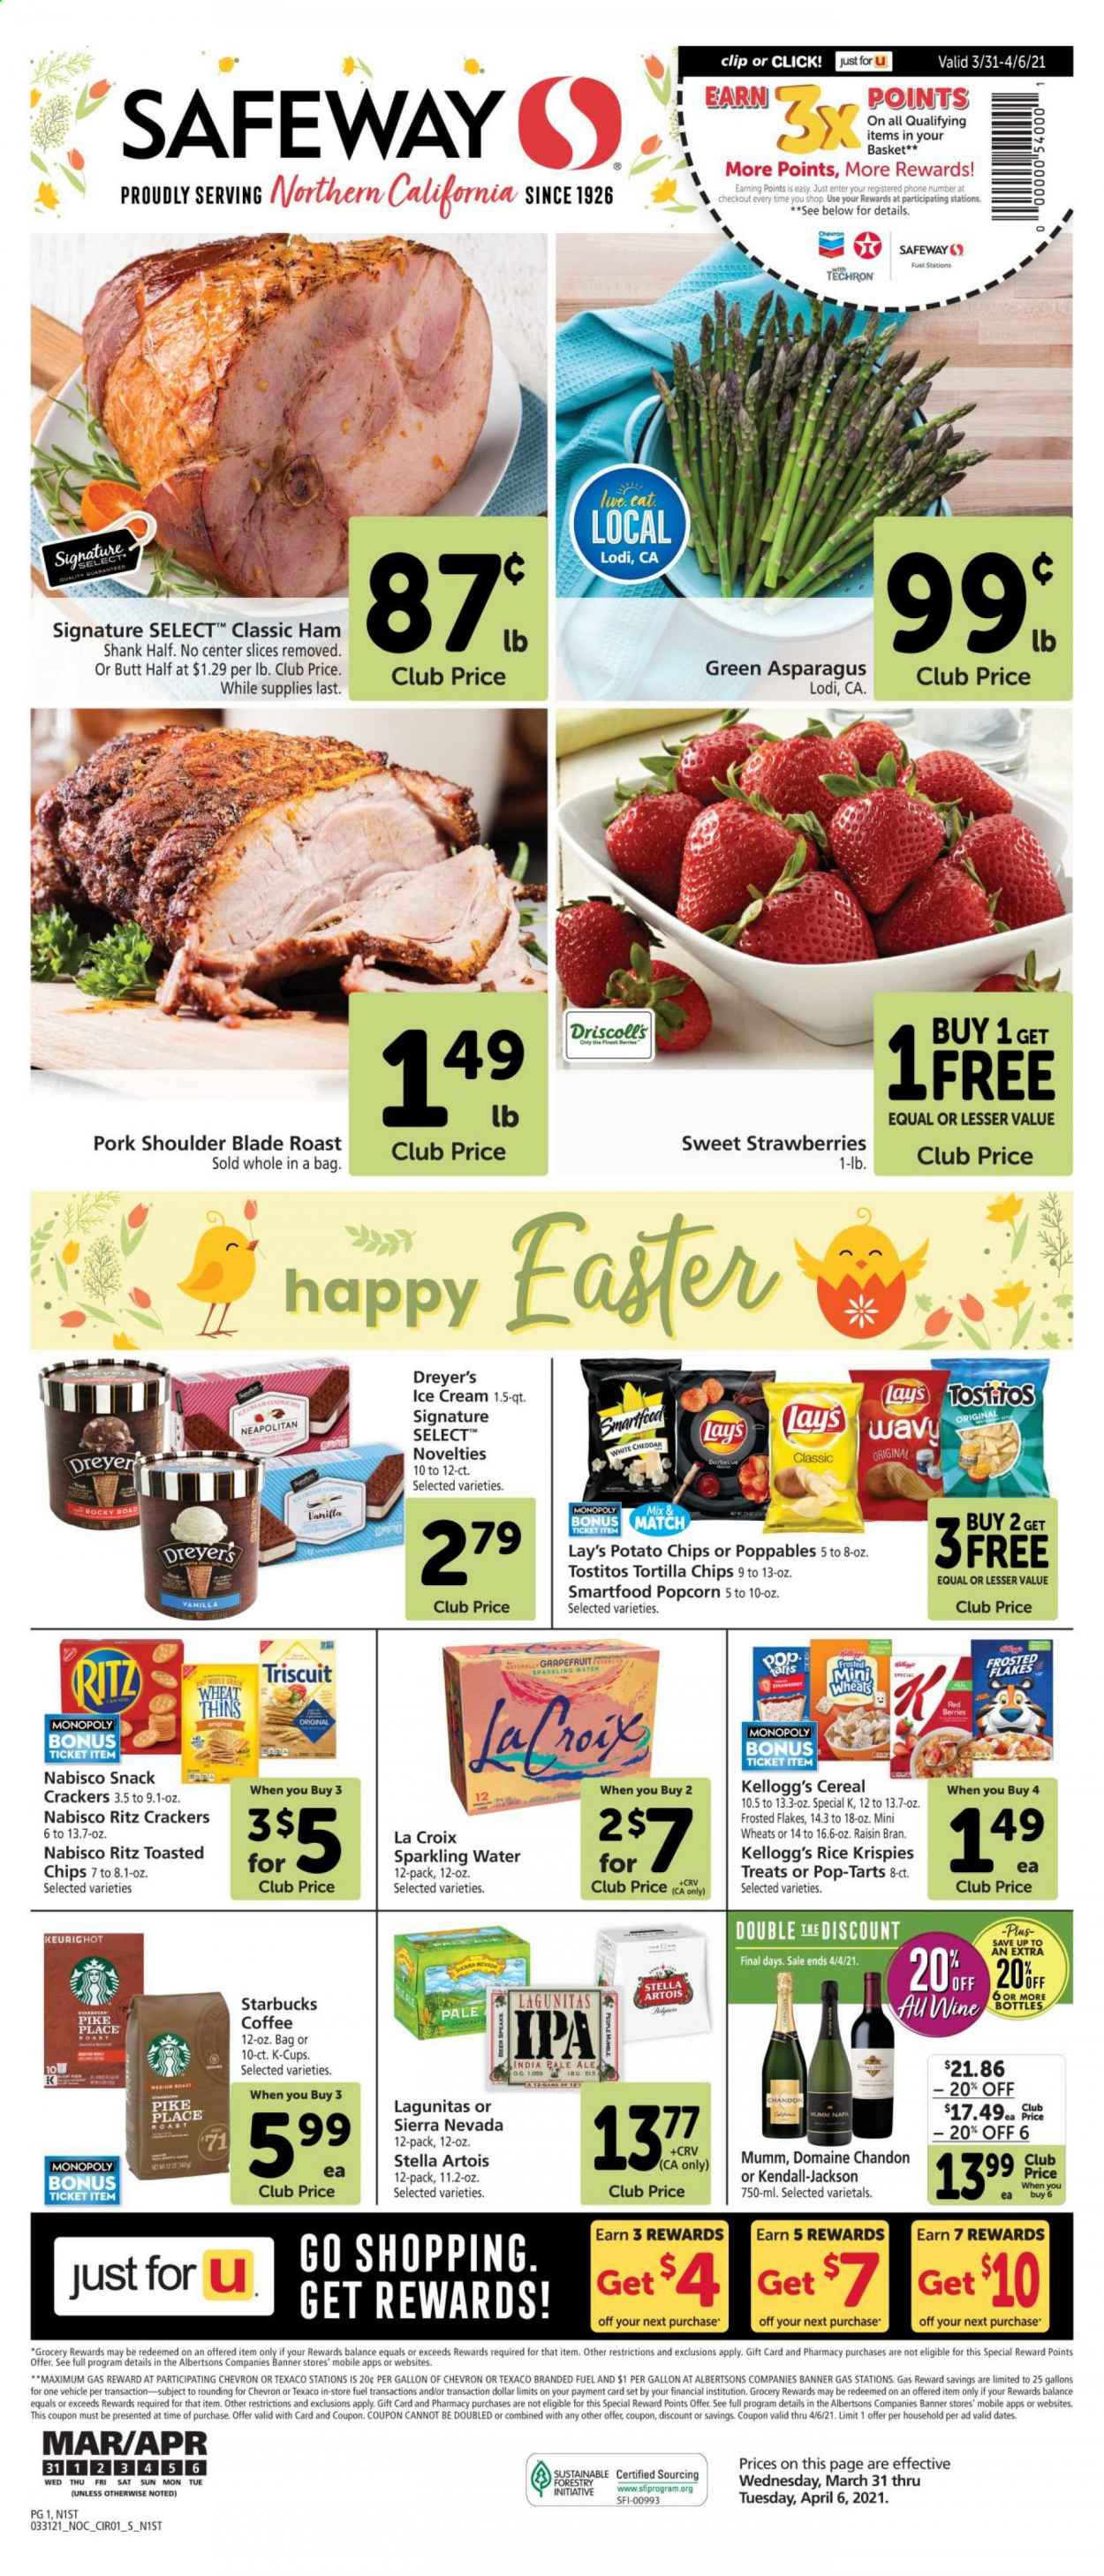 thumbnail - Safeway Flyer - 03/31/2021 - 04/06/2021 - Sales products - pork meat, pork shoulder, ham, ham shank, cheddar, ice cream, strawberries, crackers, Kellogg's, Pop-Tarts, RITZ, tortilla chips, potato chips, chips, snack, Lay’s, Smartfood, Thins, popcorn, Tostitos, cereals, Rice Krispies, Frosted Flakes, Raisin Bran, dried dates, sparkling water, coffee, Starbucks, coffee capsules, K-Cups, wine, beer, Stella Artois, IPA, asparagus. Page 1.